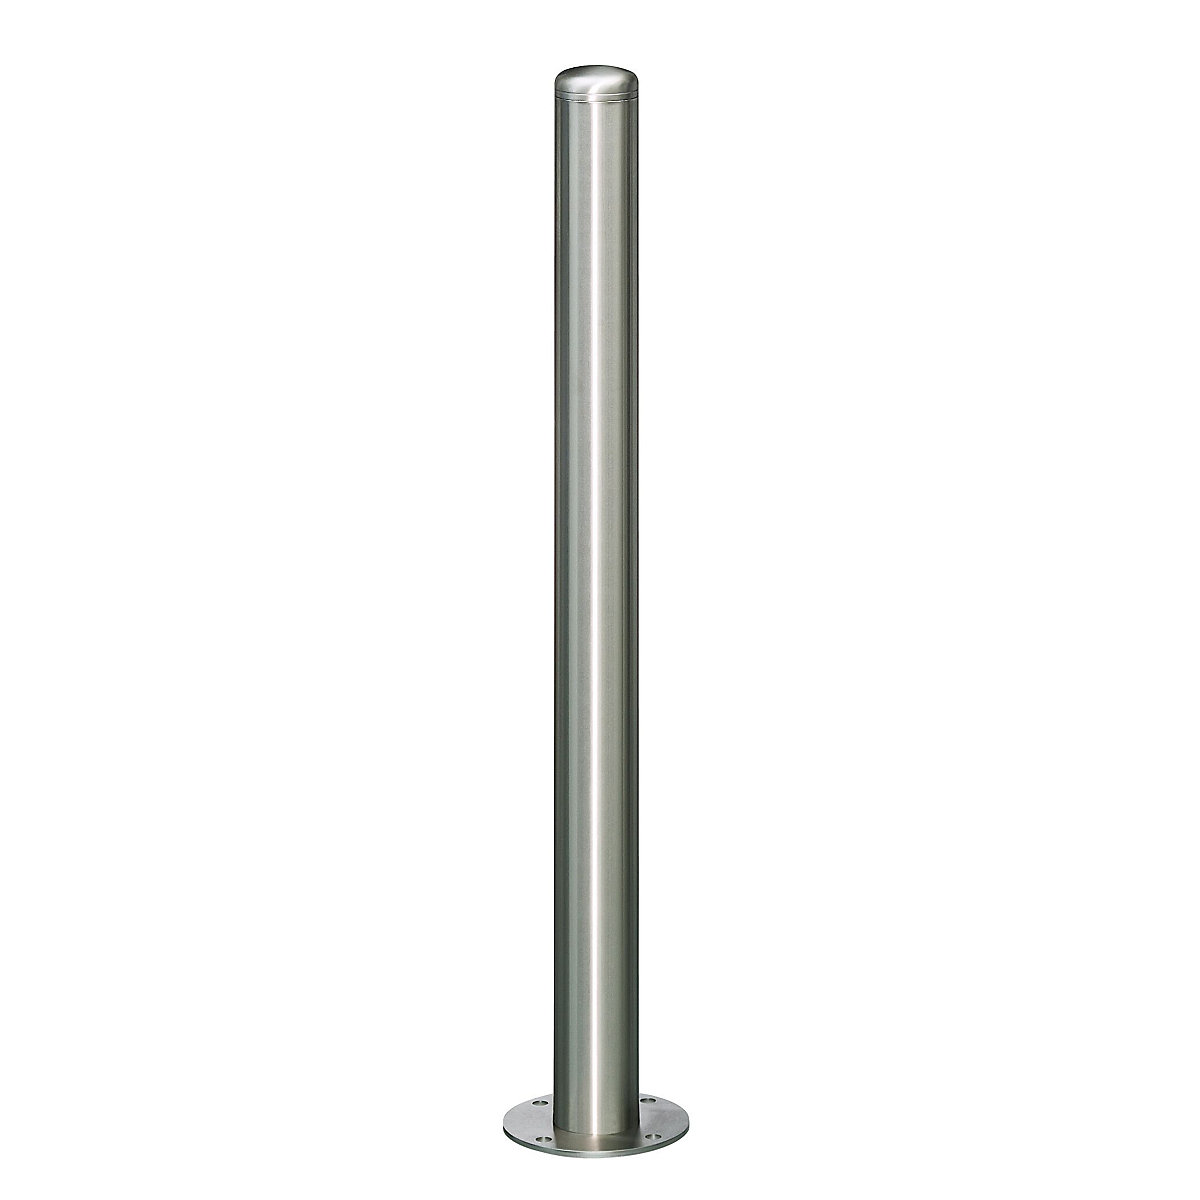 Stainless steel barrier post, with end cap, base plate to bolt in place, Ø 76 mm